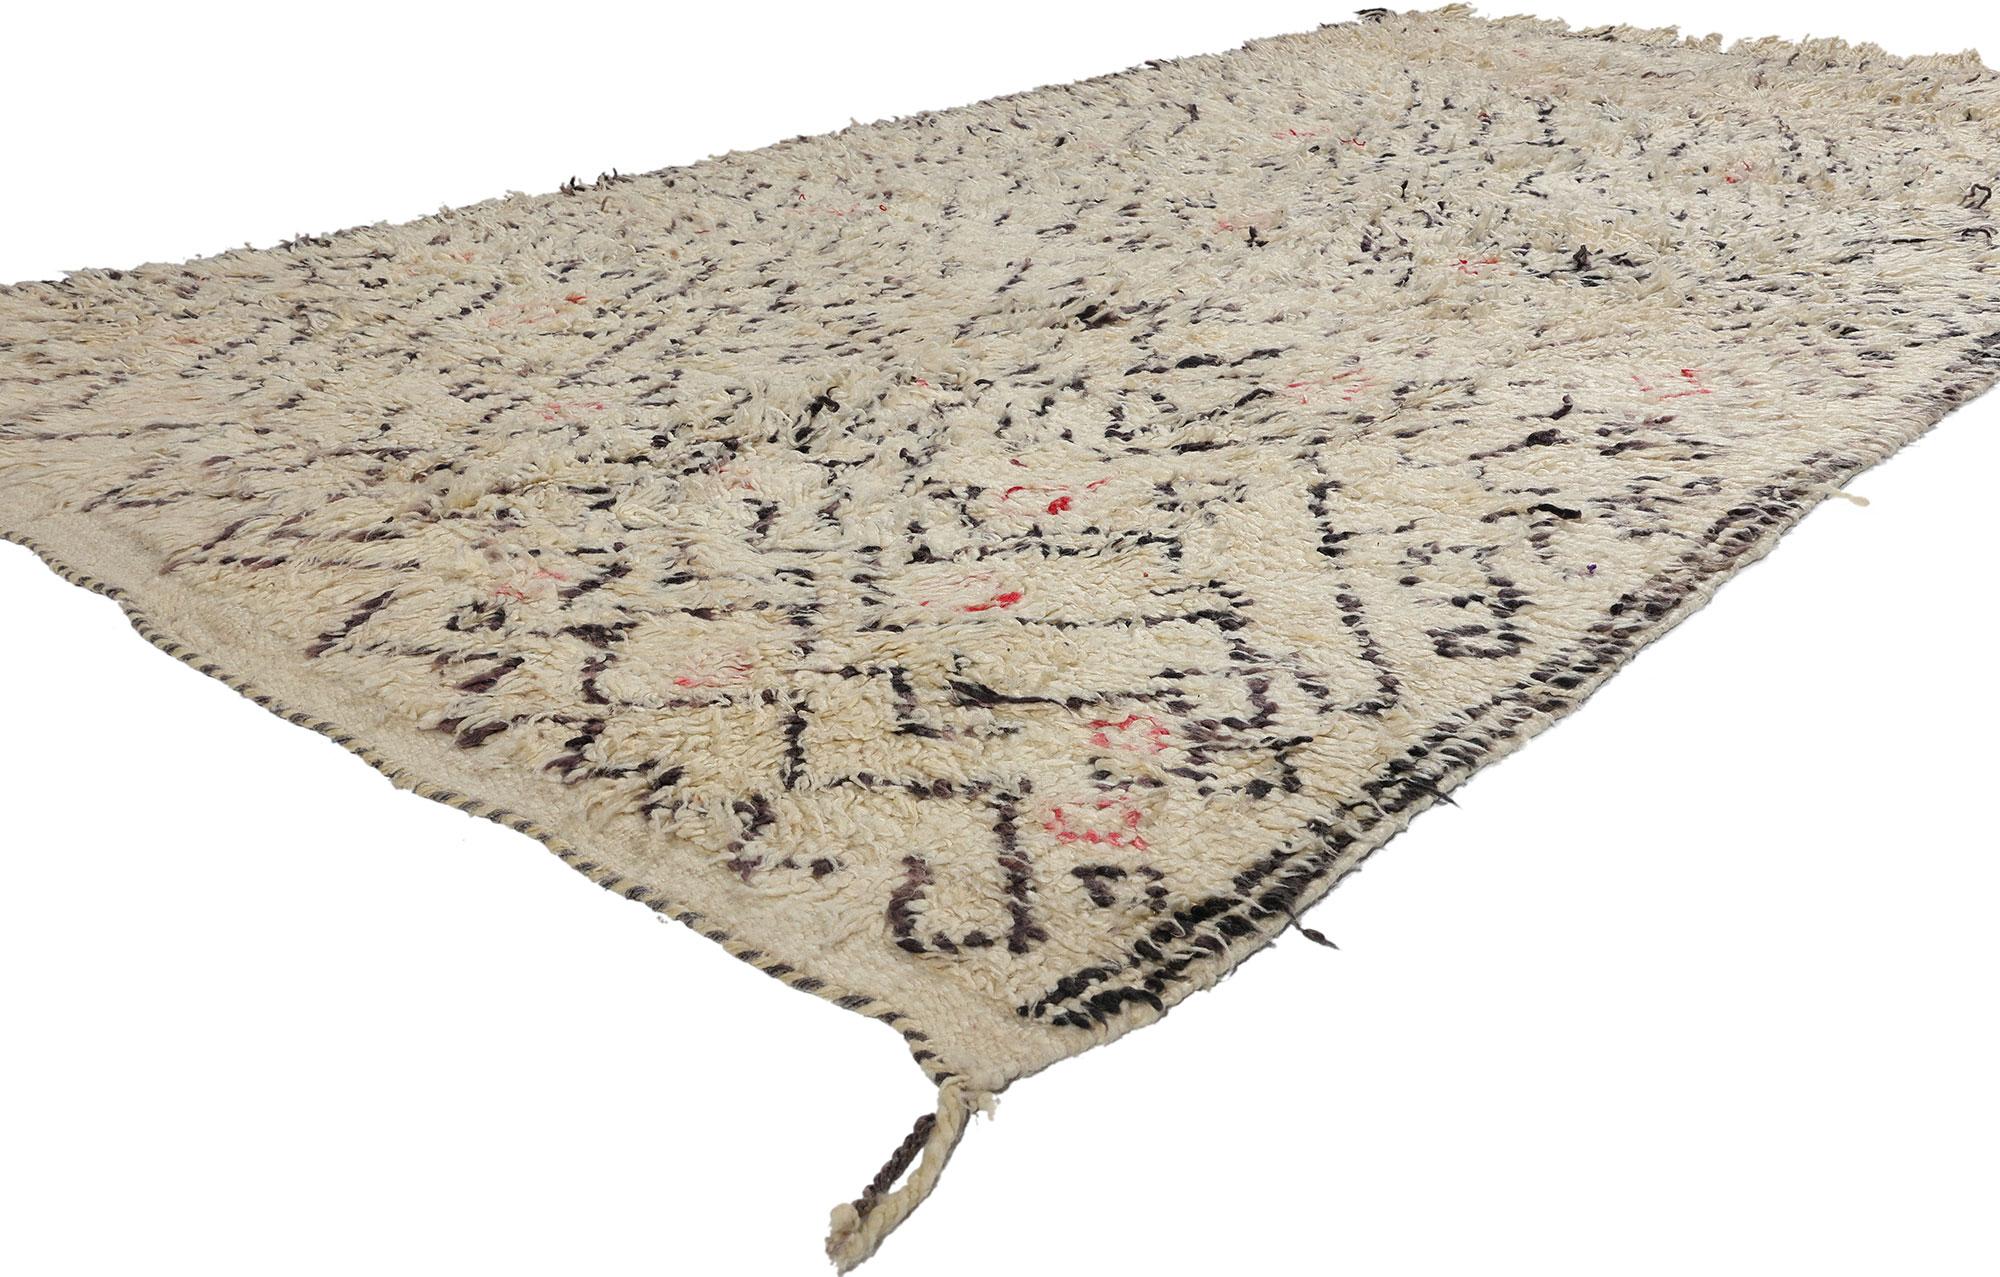 21724 Vintage Moroccan Azilal Rug, 04'09 x 09'00. Neutral Moroccan Azilal rugs, handwoven by Berber artisans in the Azilal region of Morocco, feature subdued tones like beige, cream, taupe, and gray, distinguishing them from the vibrant Moroccan rug